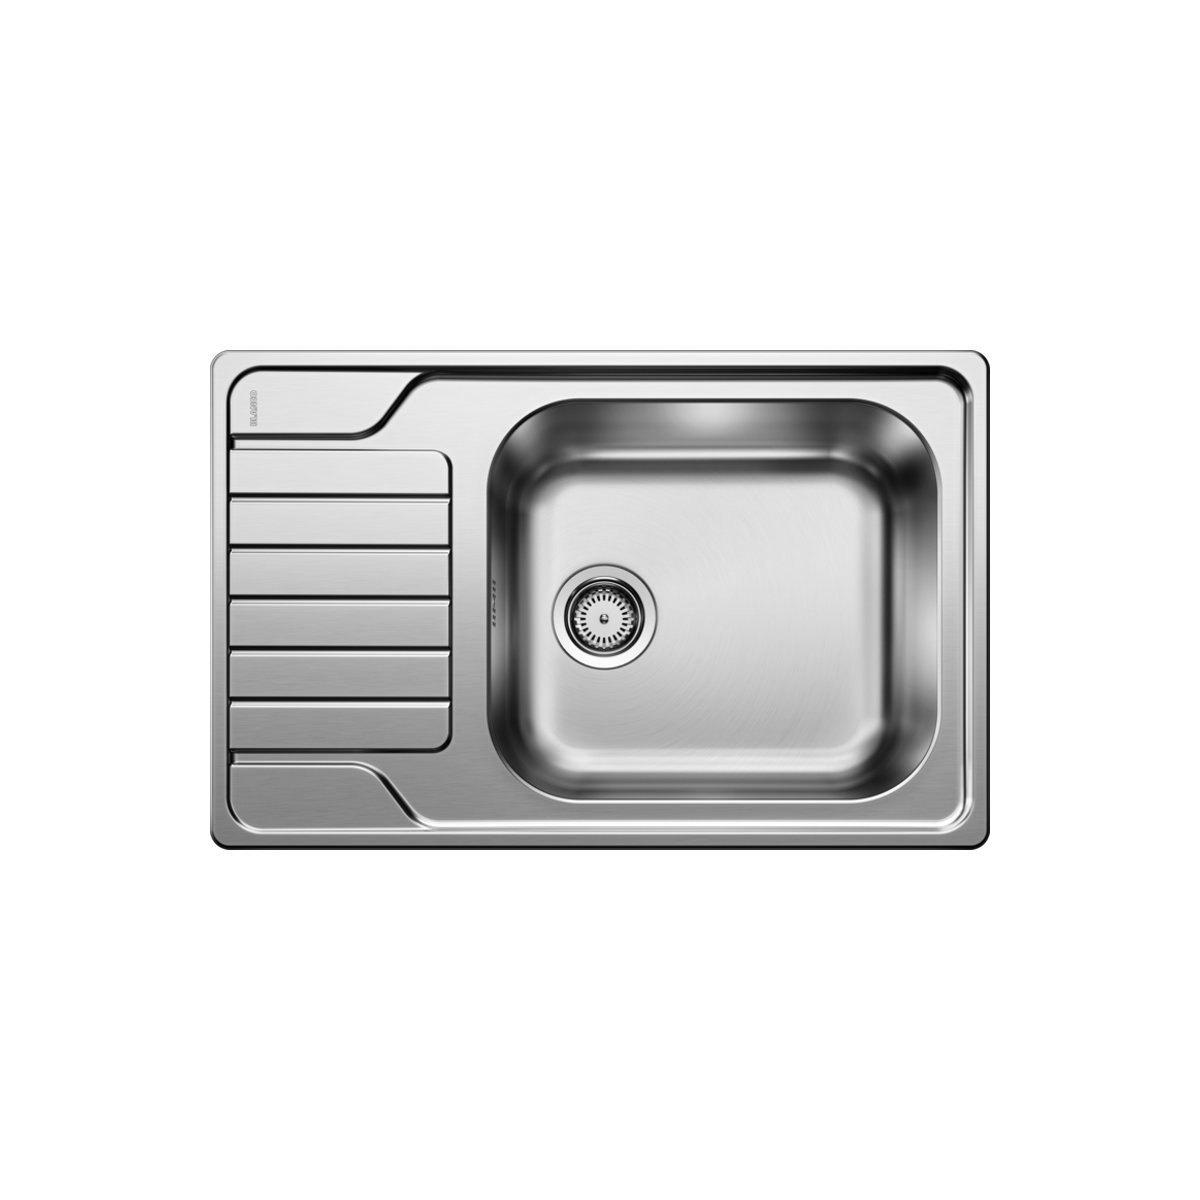 Dinas XL 6 S Compact Blanco Modern 1 Bowl Stainless Steel Kitchen Sink with Reversible Drainer 78×50